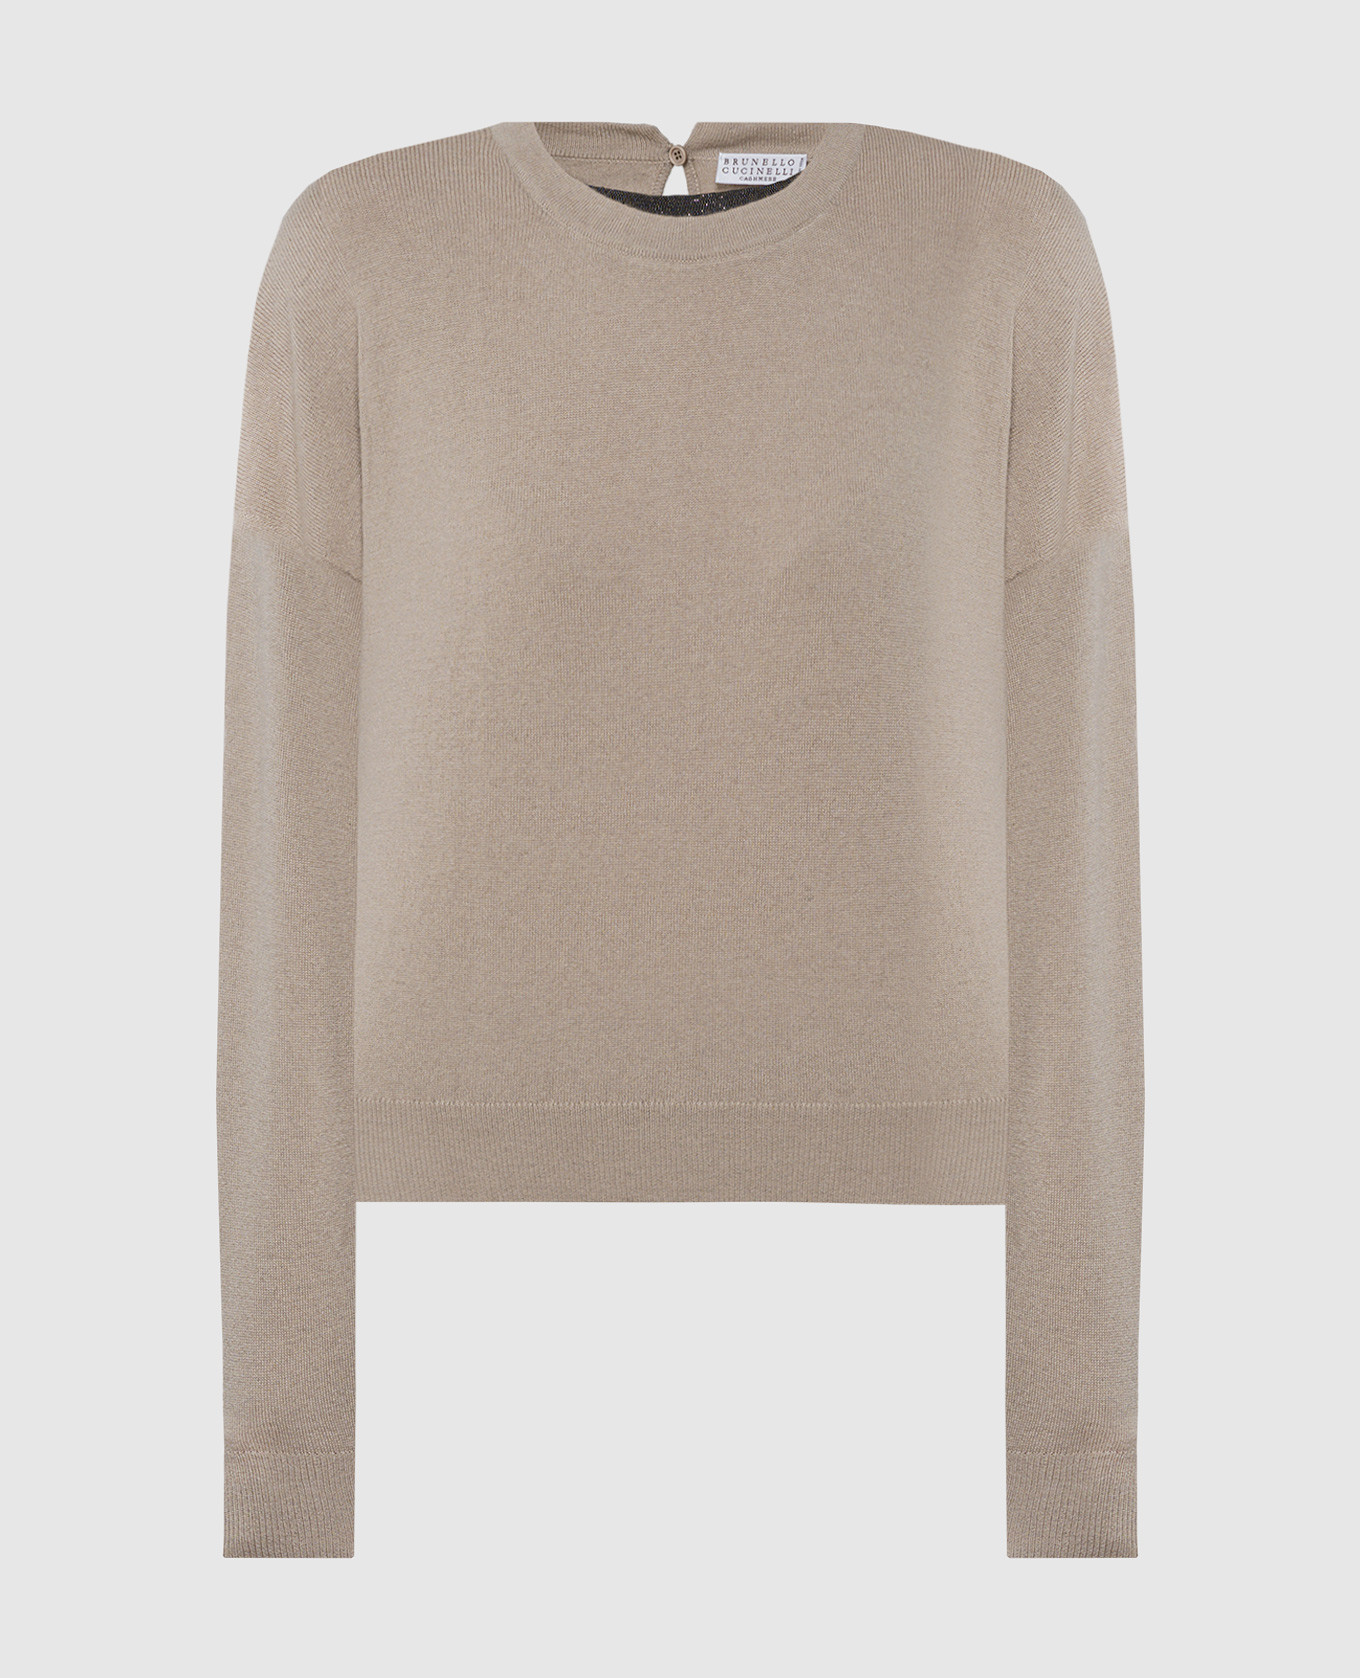 Brown cashmere sweater with monil chain